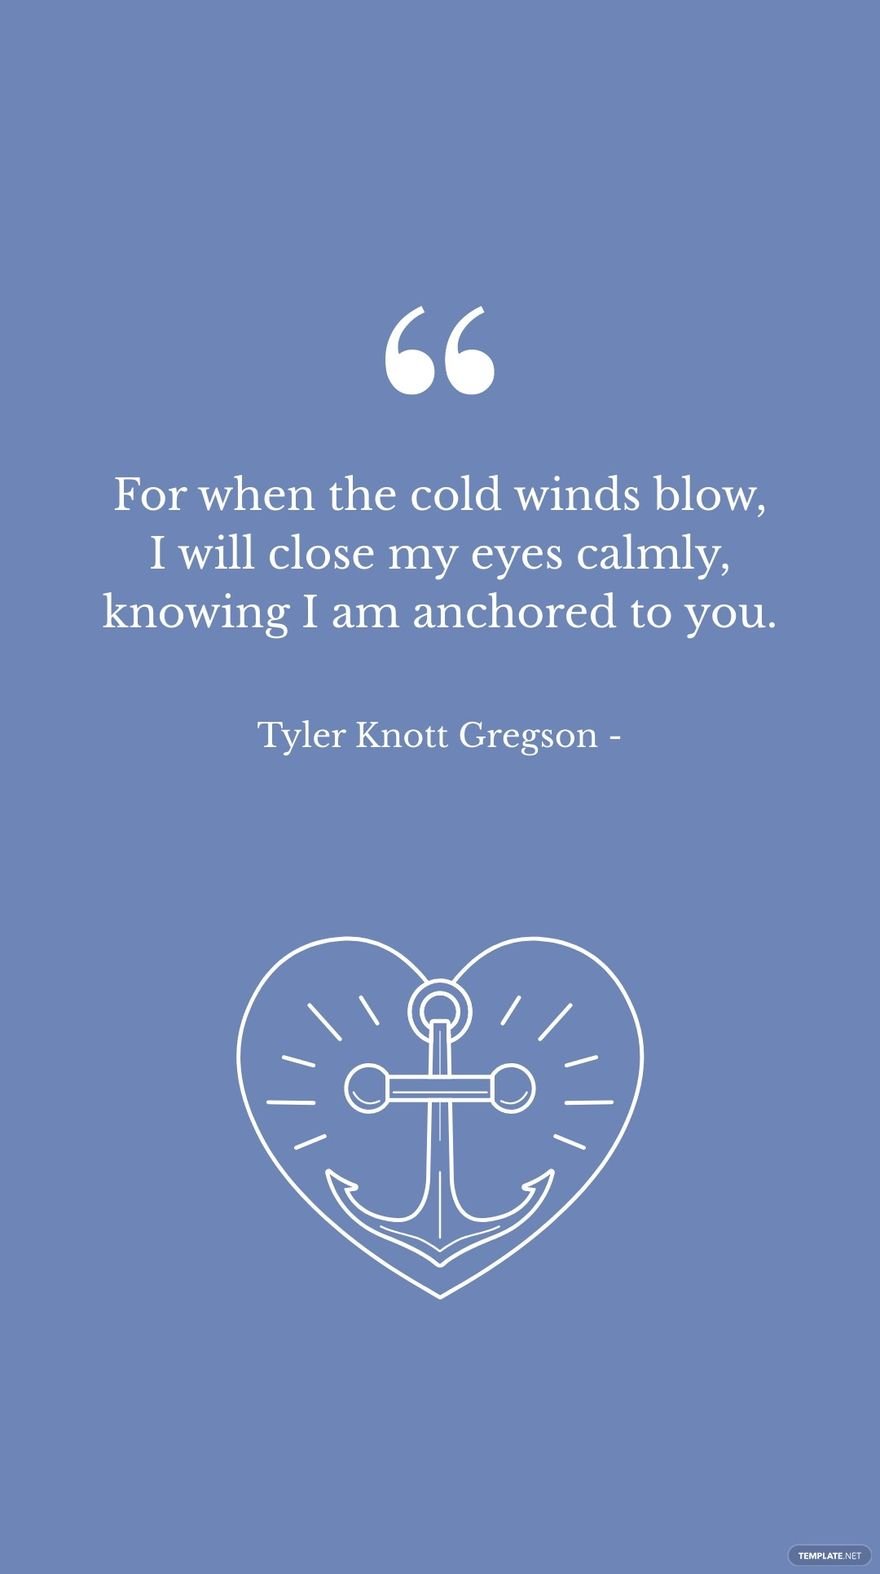 Tyler Knott Gregson - For when the cold winds blow, I will close my eyes calmly, knowing I am anchored to you.